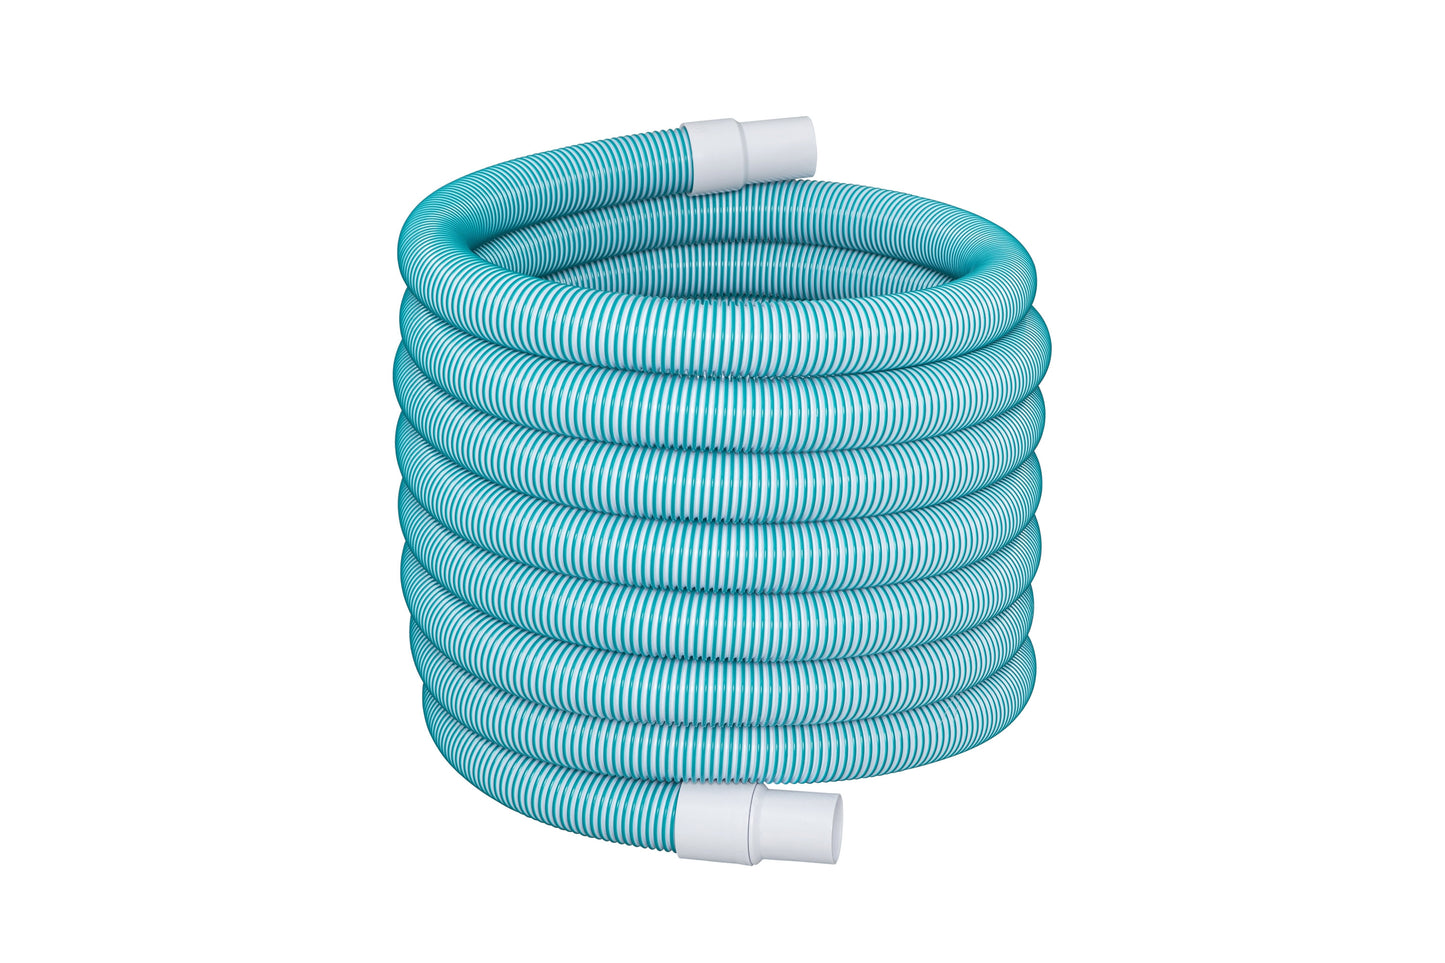 Bestway Flowclear Pool Cleaning Vacuum Hose 30 Feet | Compatible with Most Swimming Pools | Includes Adapter and Hose Clamps